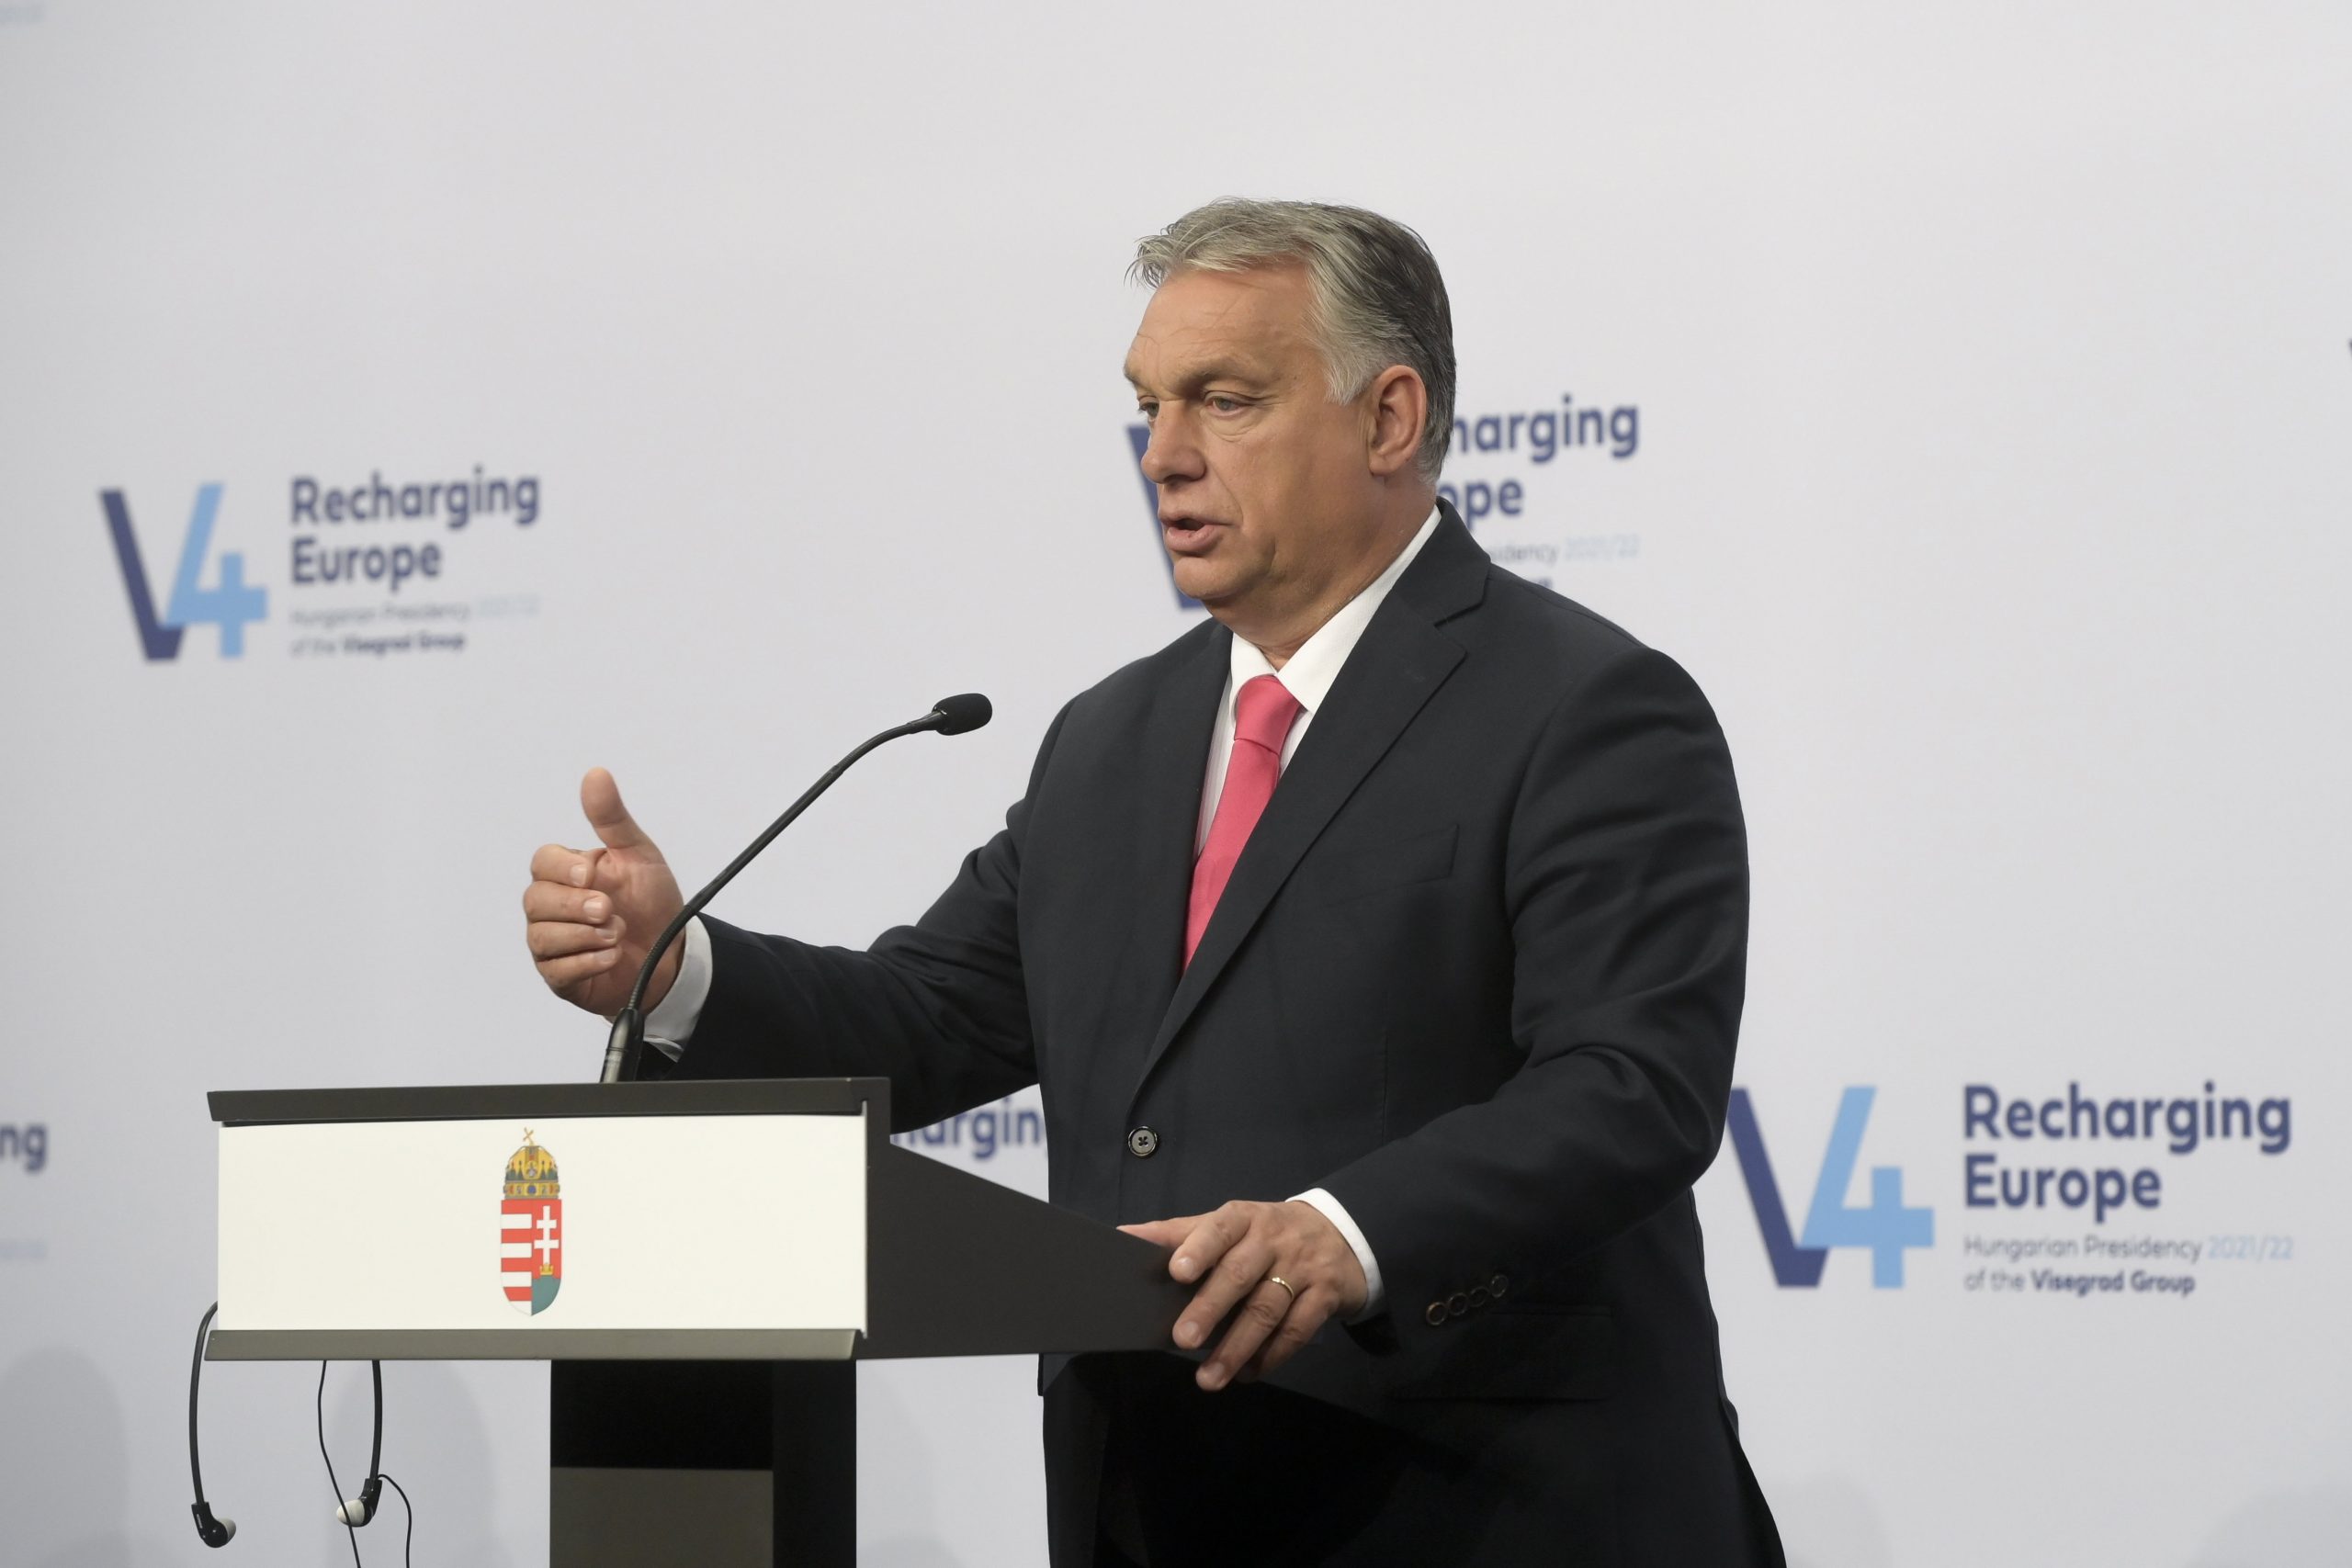 PM Orbán on V4-Egypt Summit: Migration Much Worse Now than in 2015, Strengthening Egypt Crucial